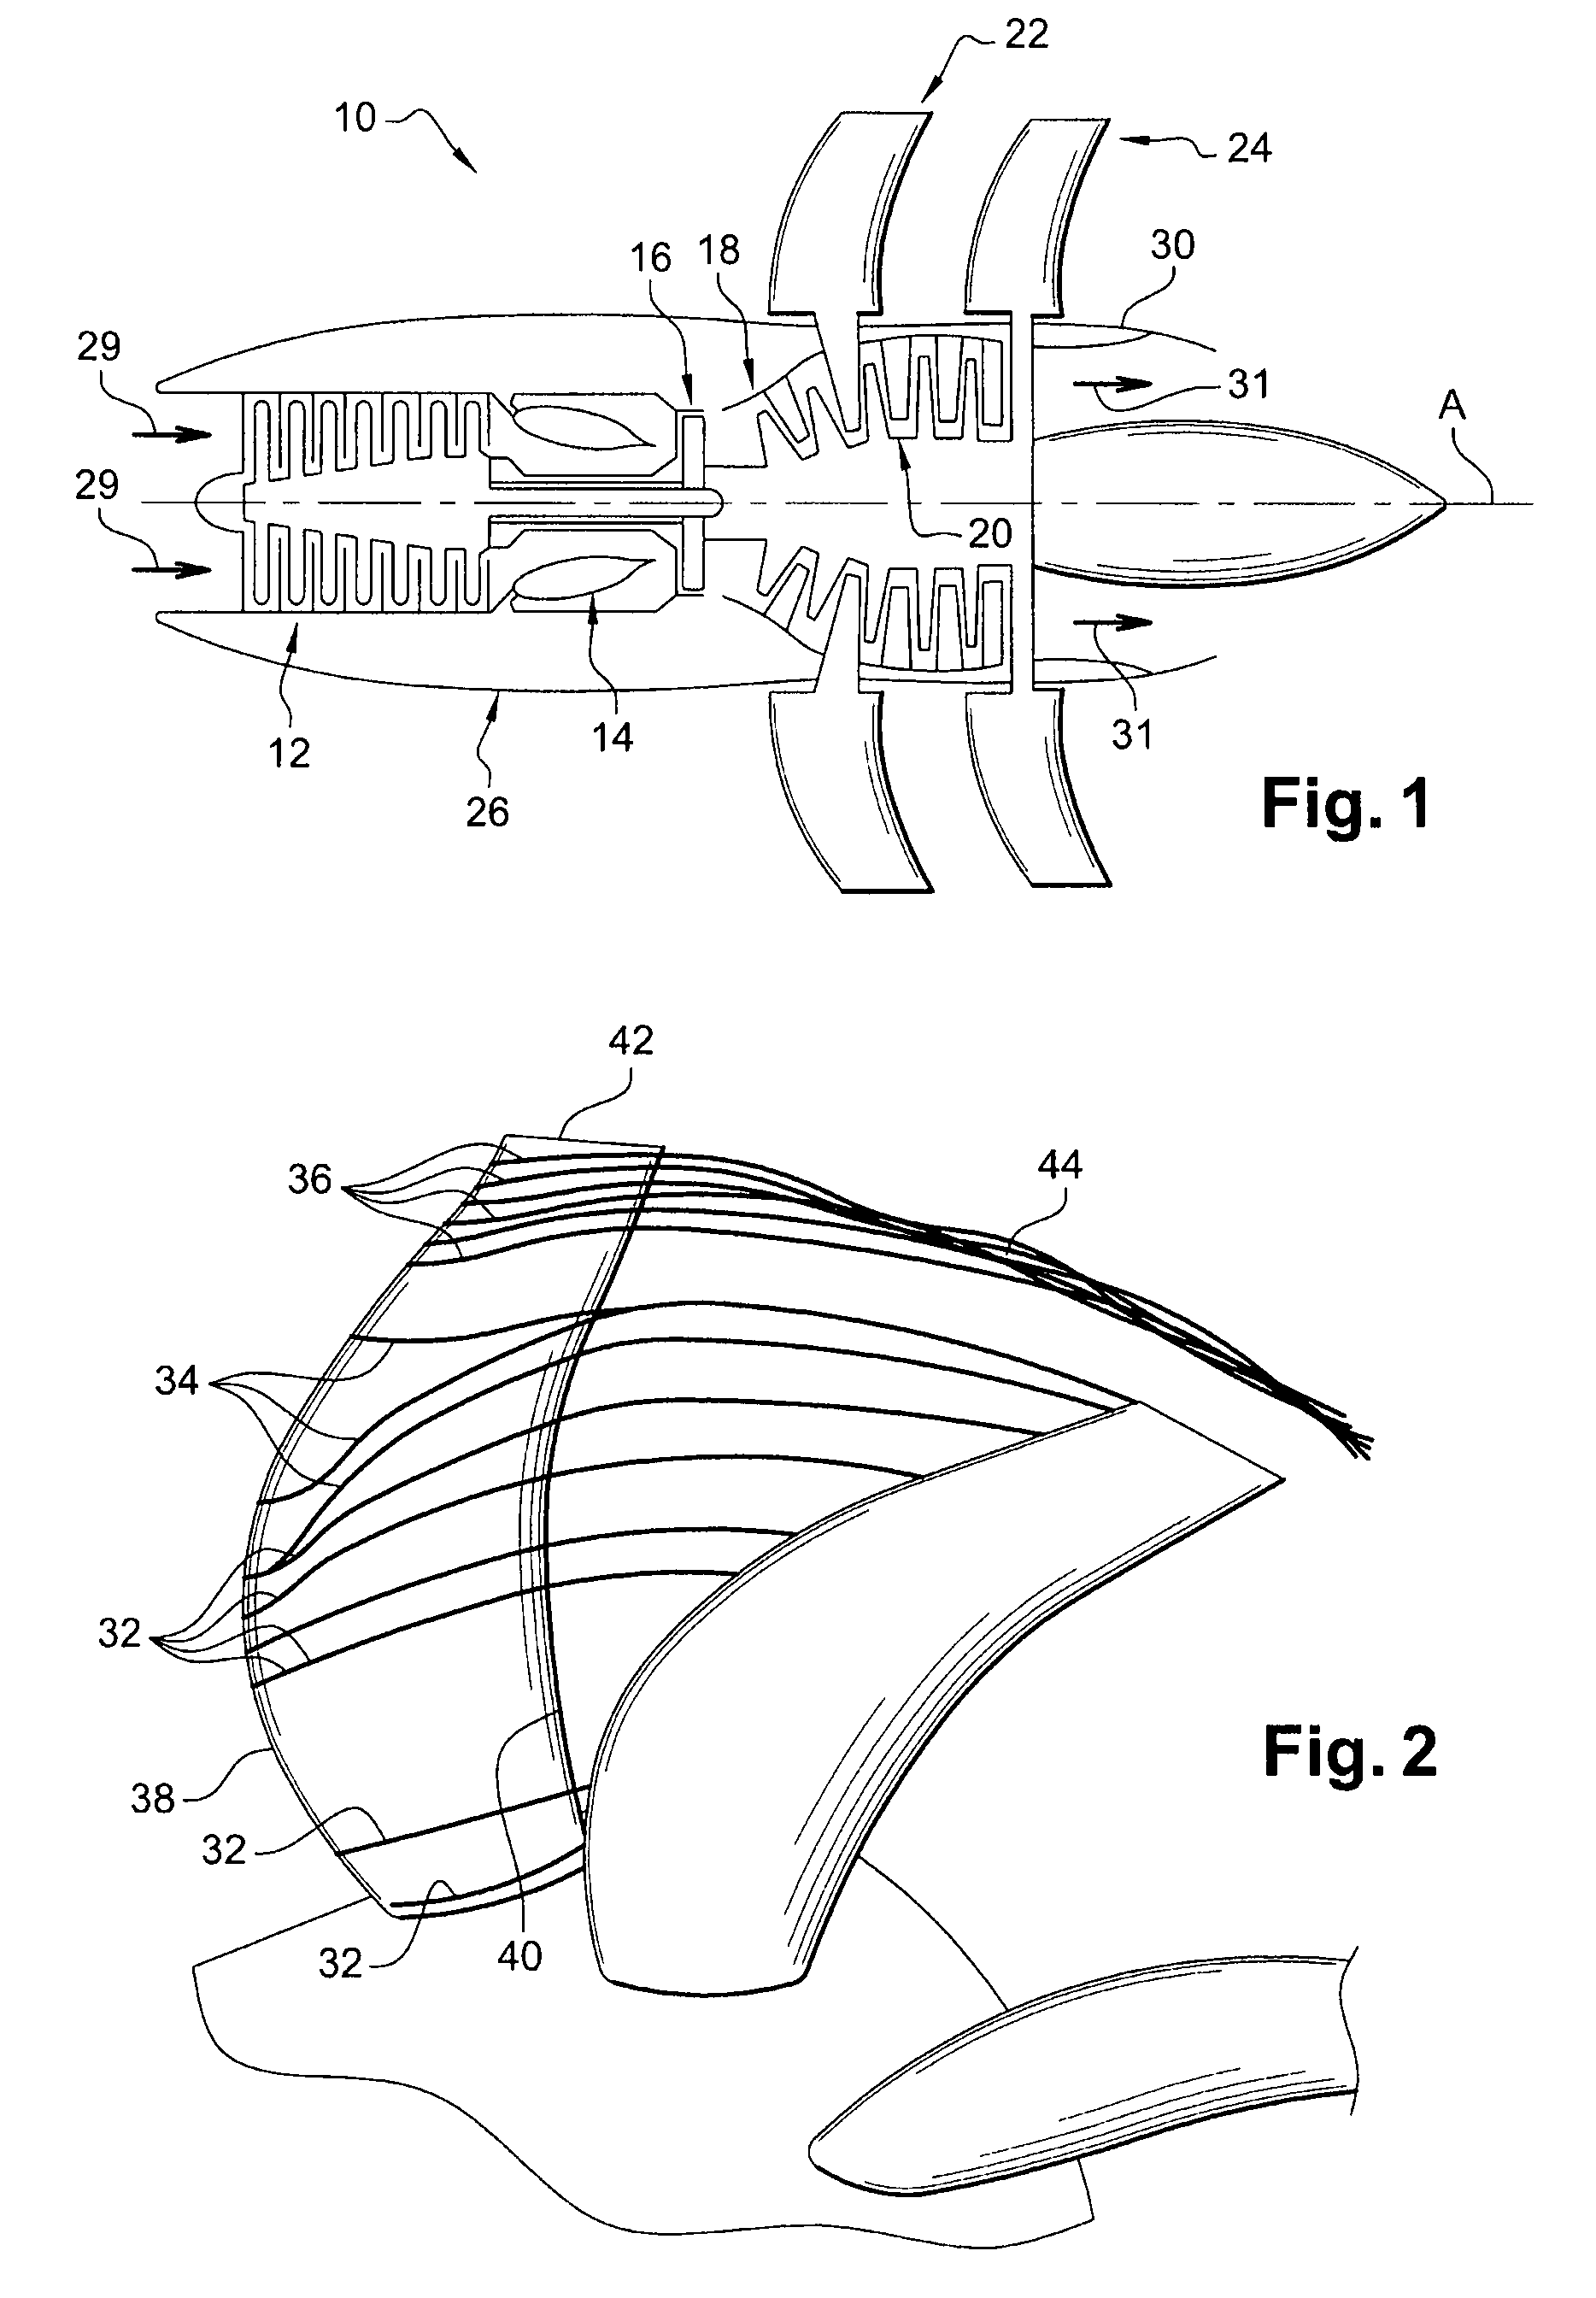 Turbomachine with unducted propellers